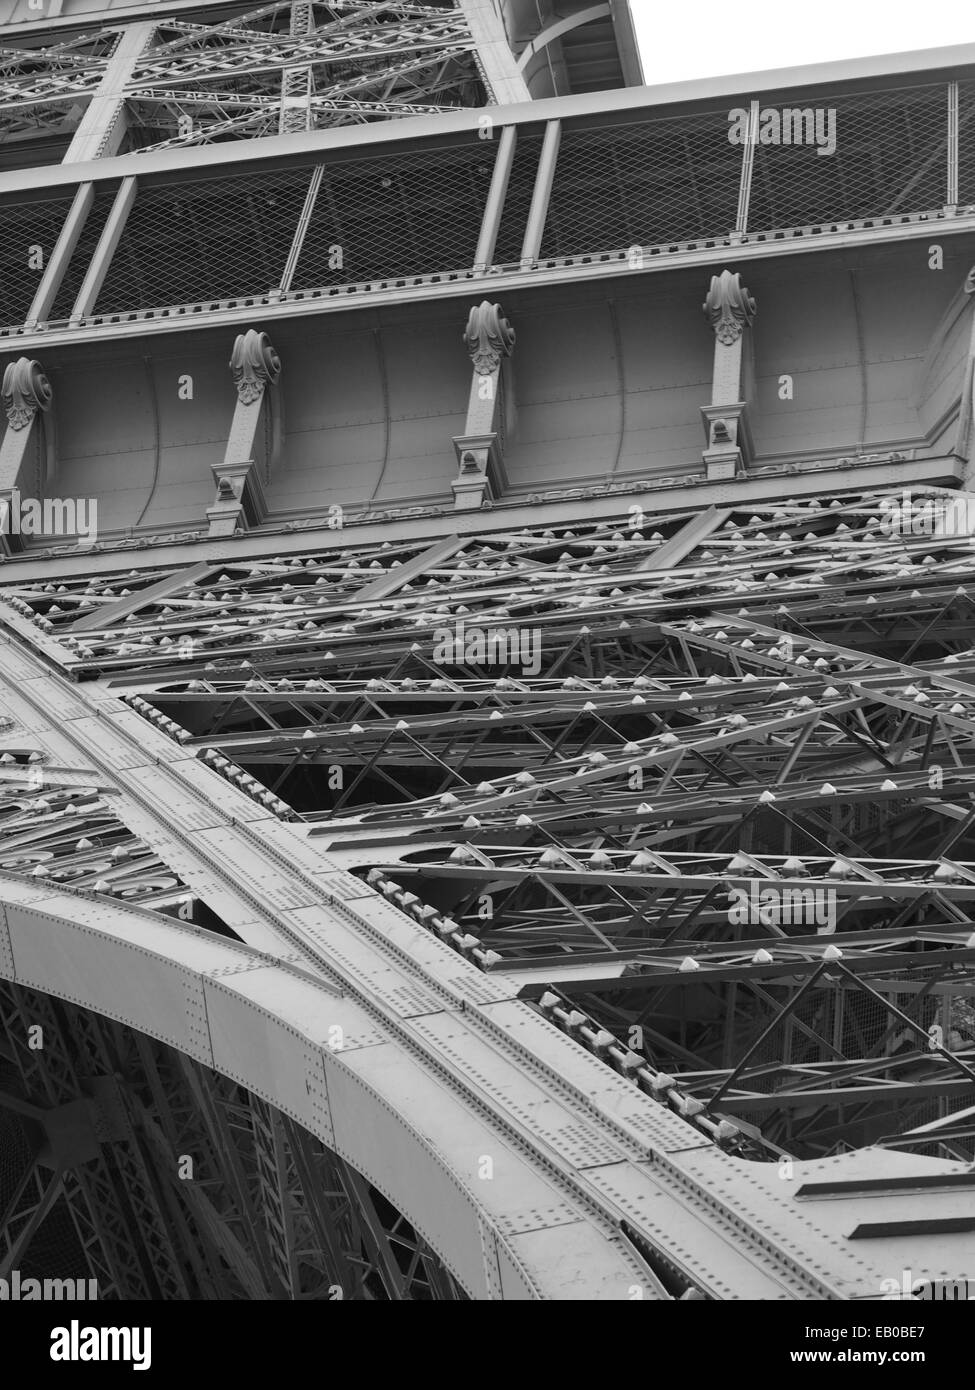 close up photo of first floor of the Eiffel Tower in black and white Stock Photo